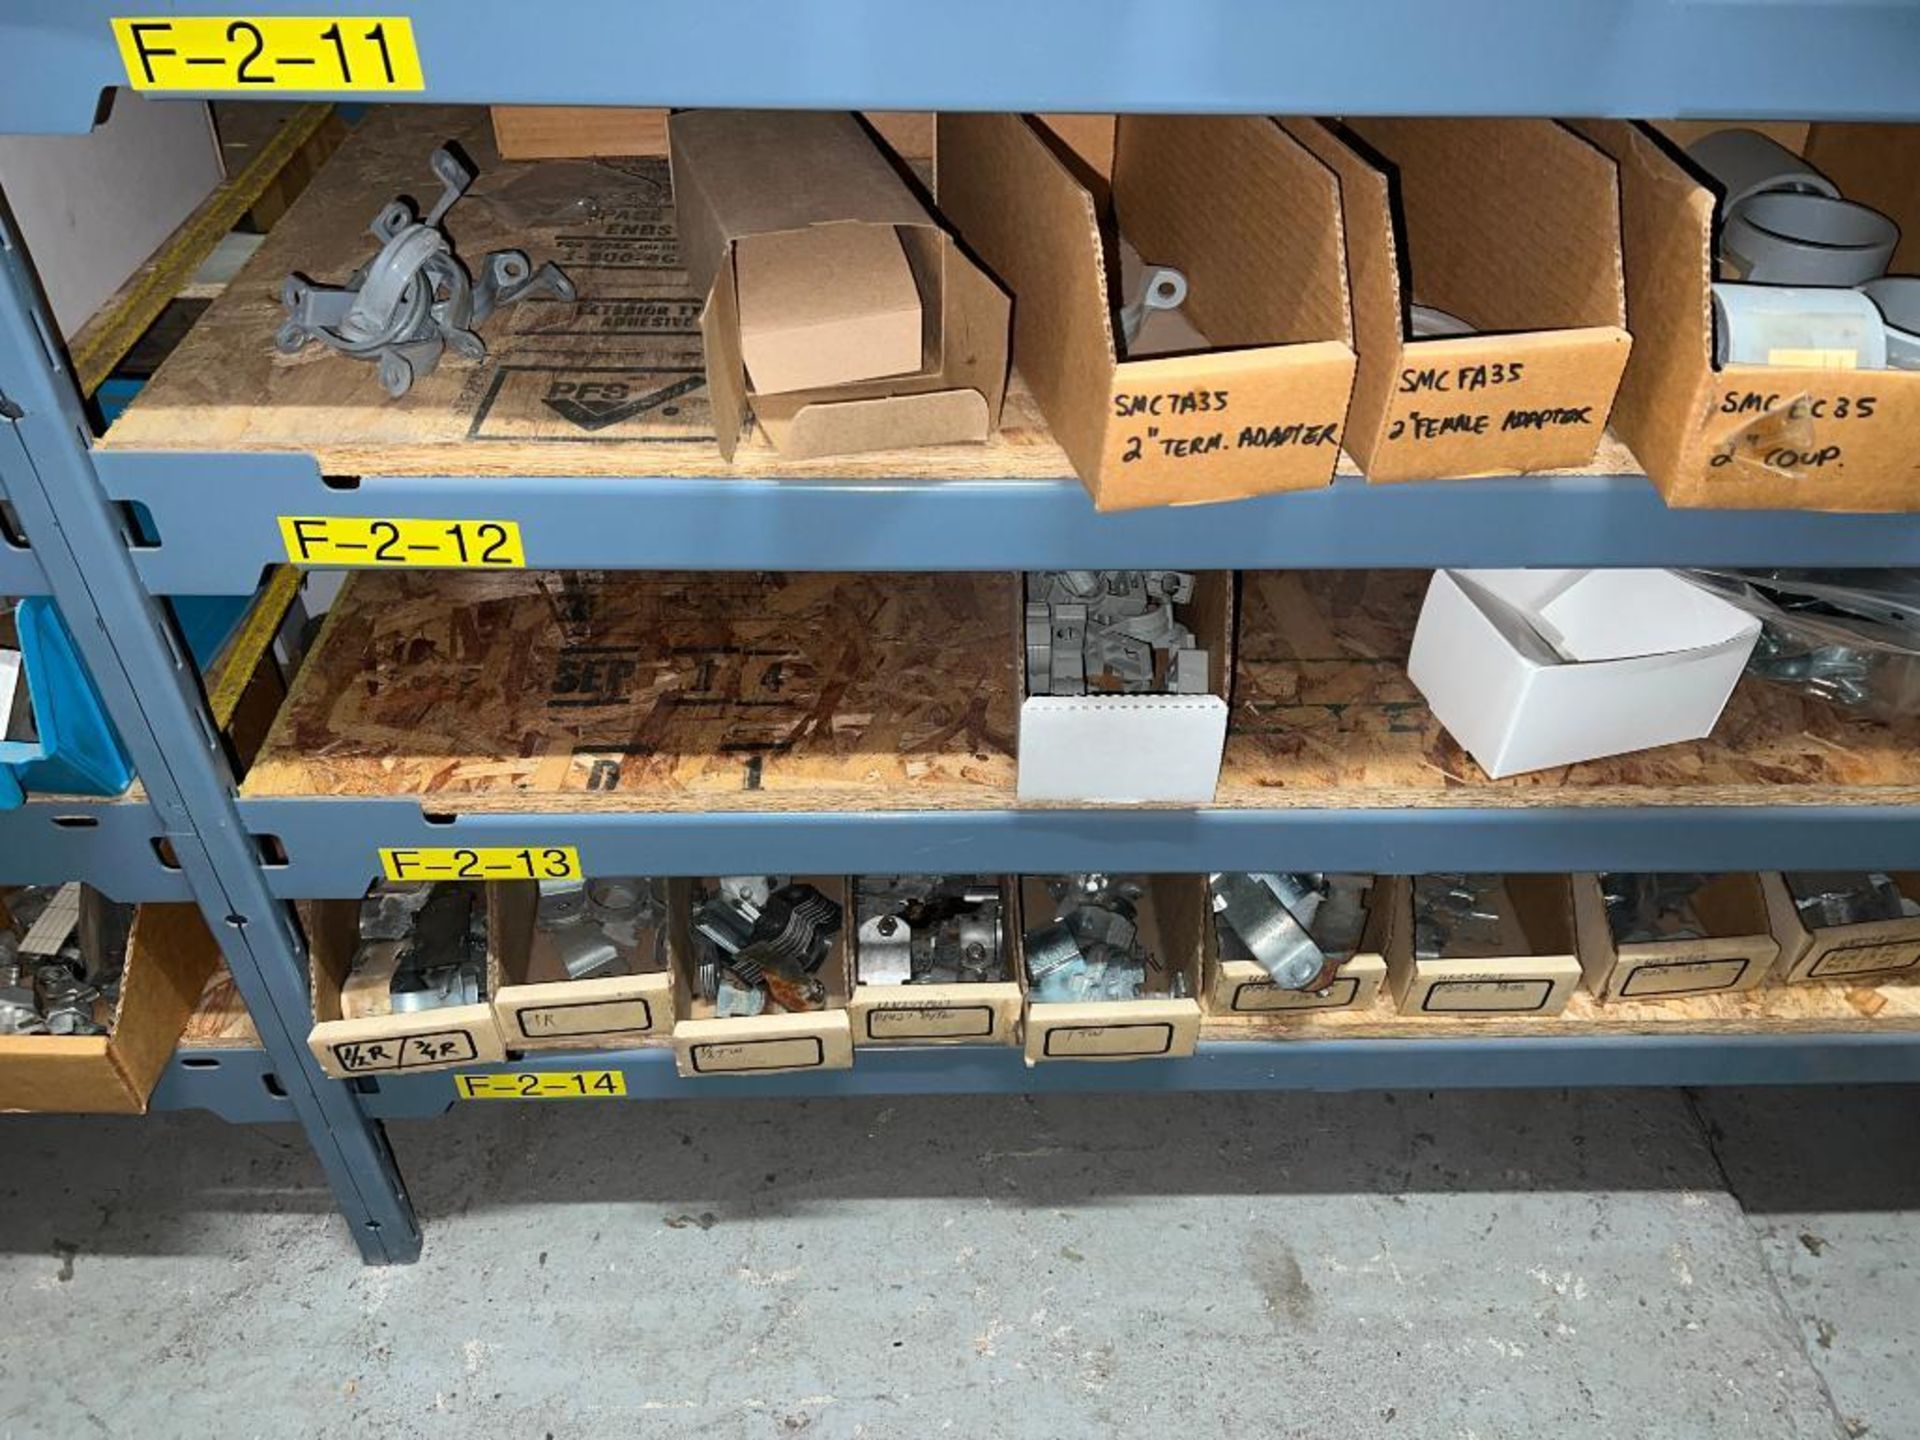 Assorted Electrical Equipment, Including: Circuit Breakers, Conduit, Conduit Adapters and Enclosures - Image 32 of 46